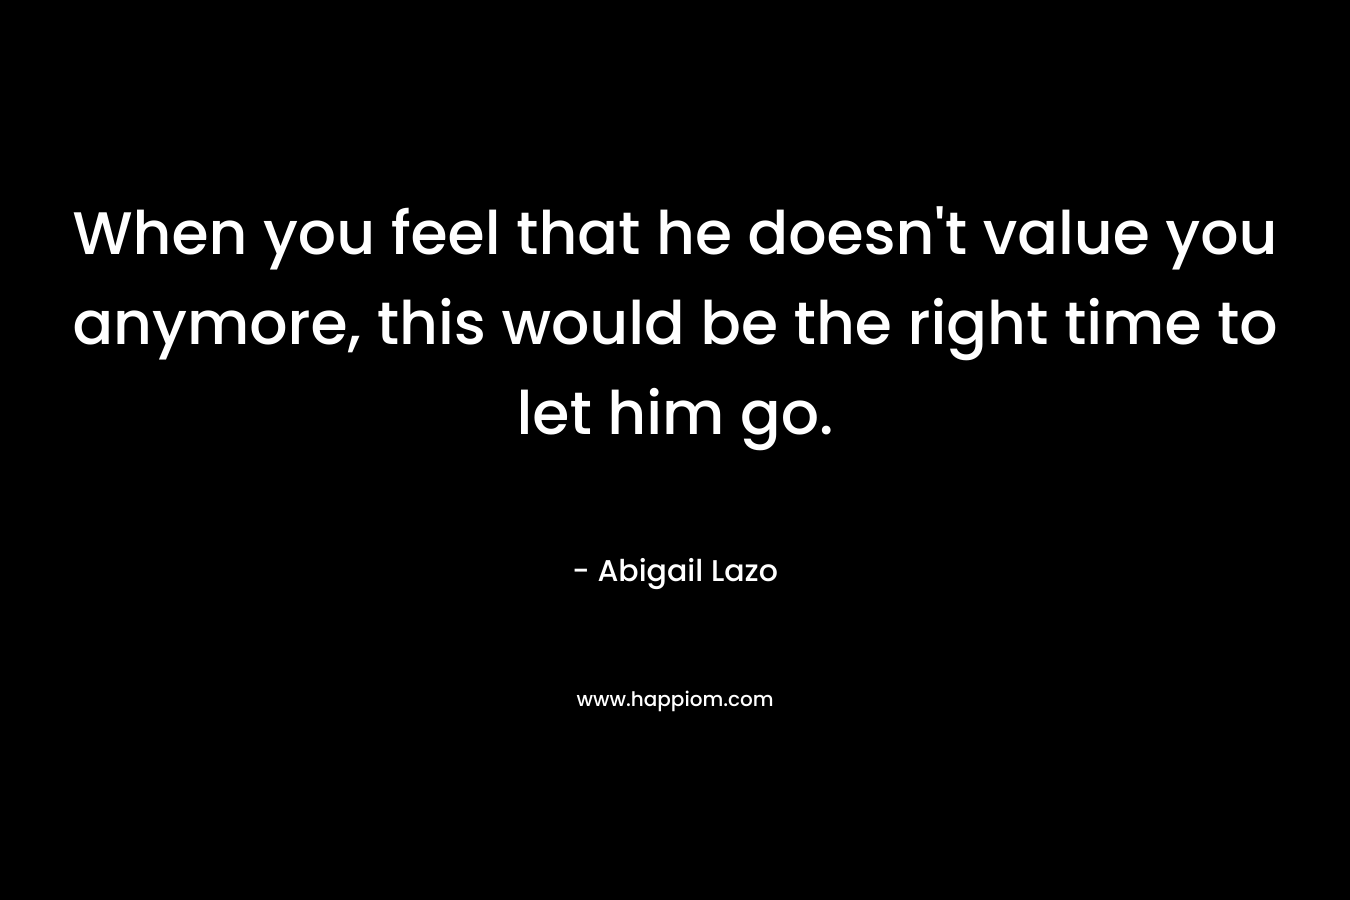 When you feel that he doesn’t value you anymore, this would be the right time to let him go. – Abigail Lazo